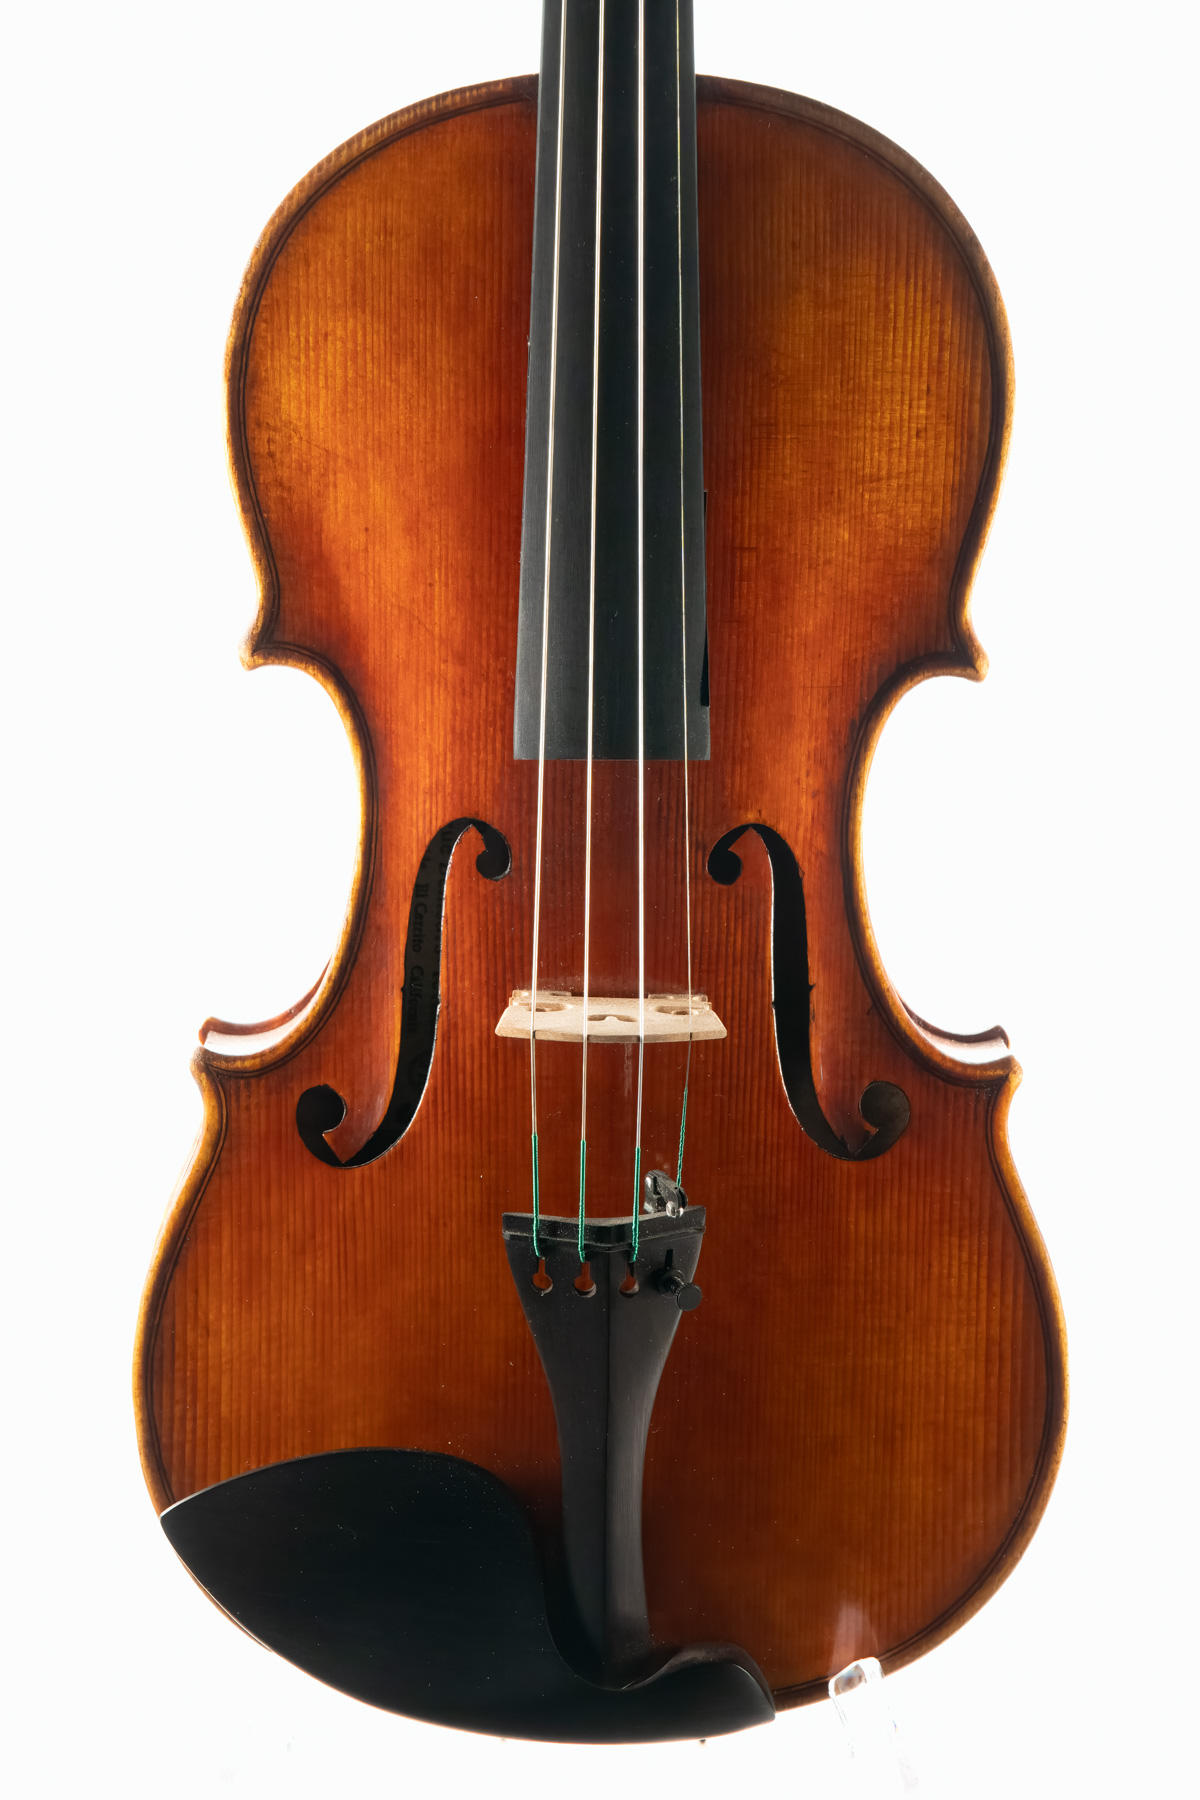 Jay Haide Vuillaume Violin Front